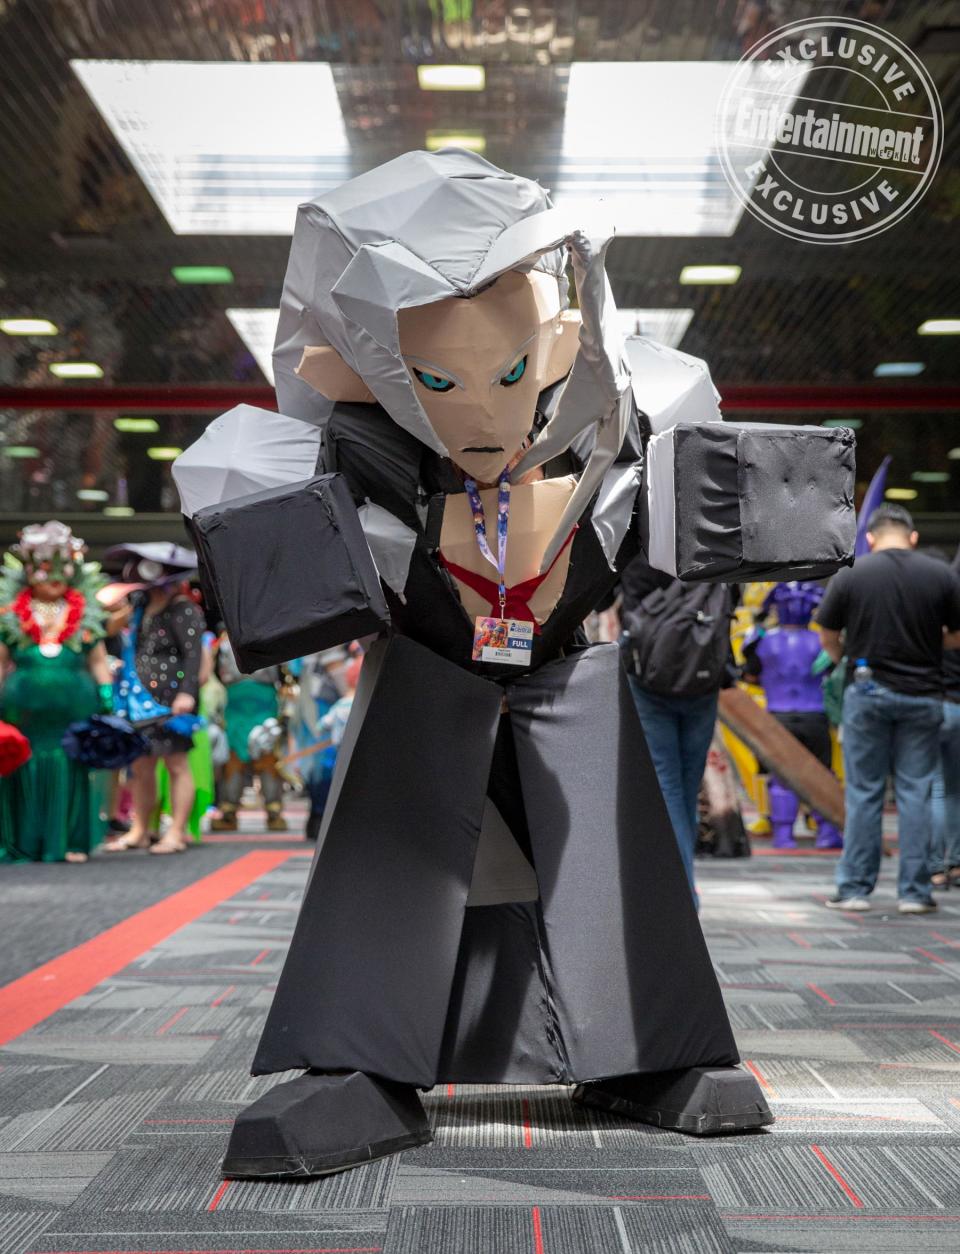 Polygon Sephiroth from Final Fantasy VII cosplayer